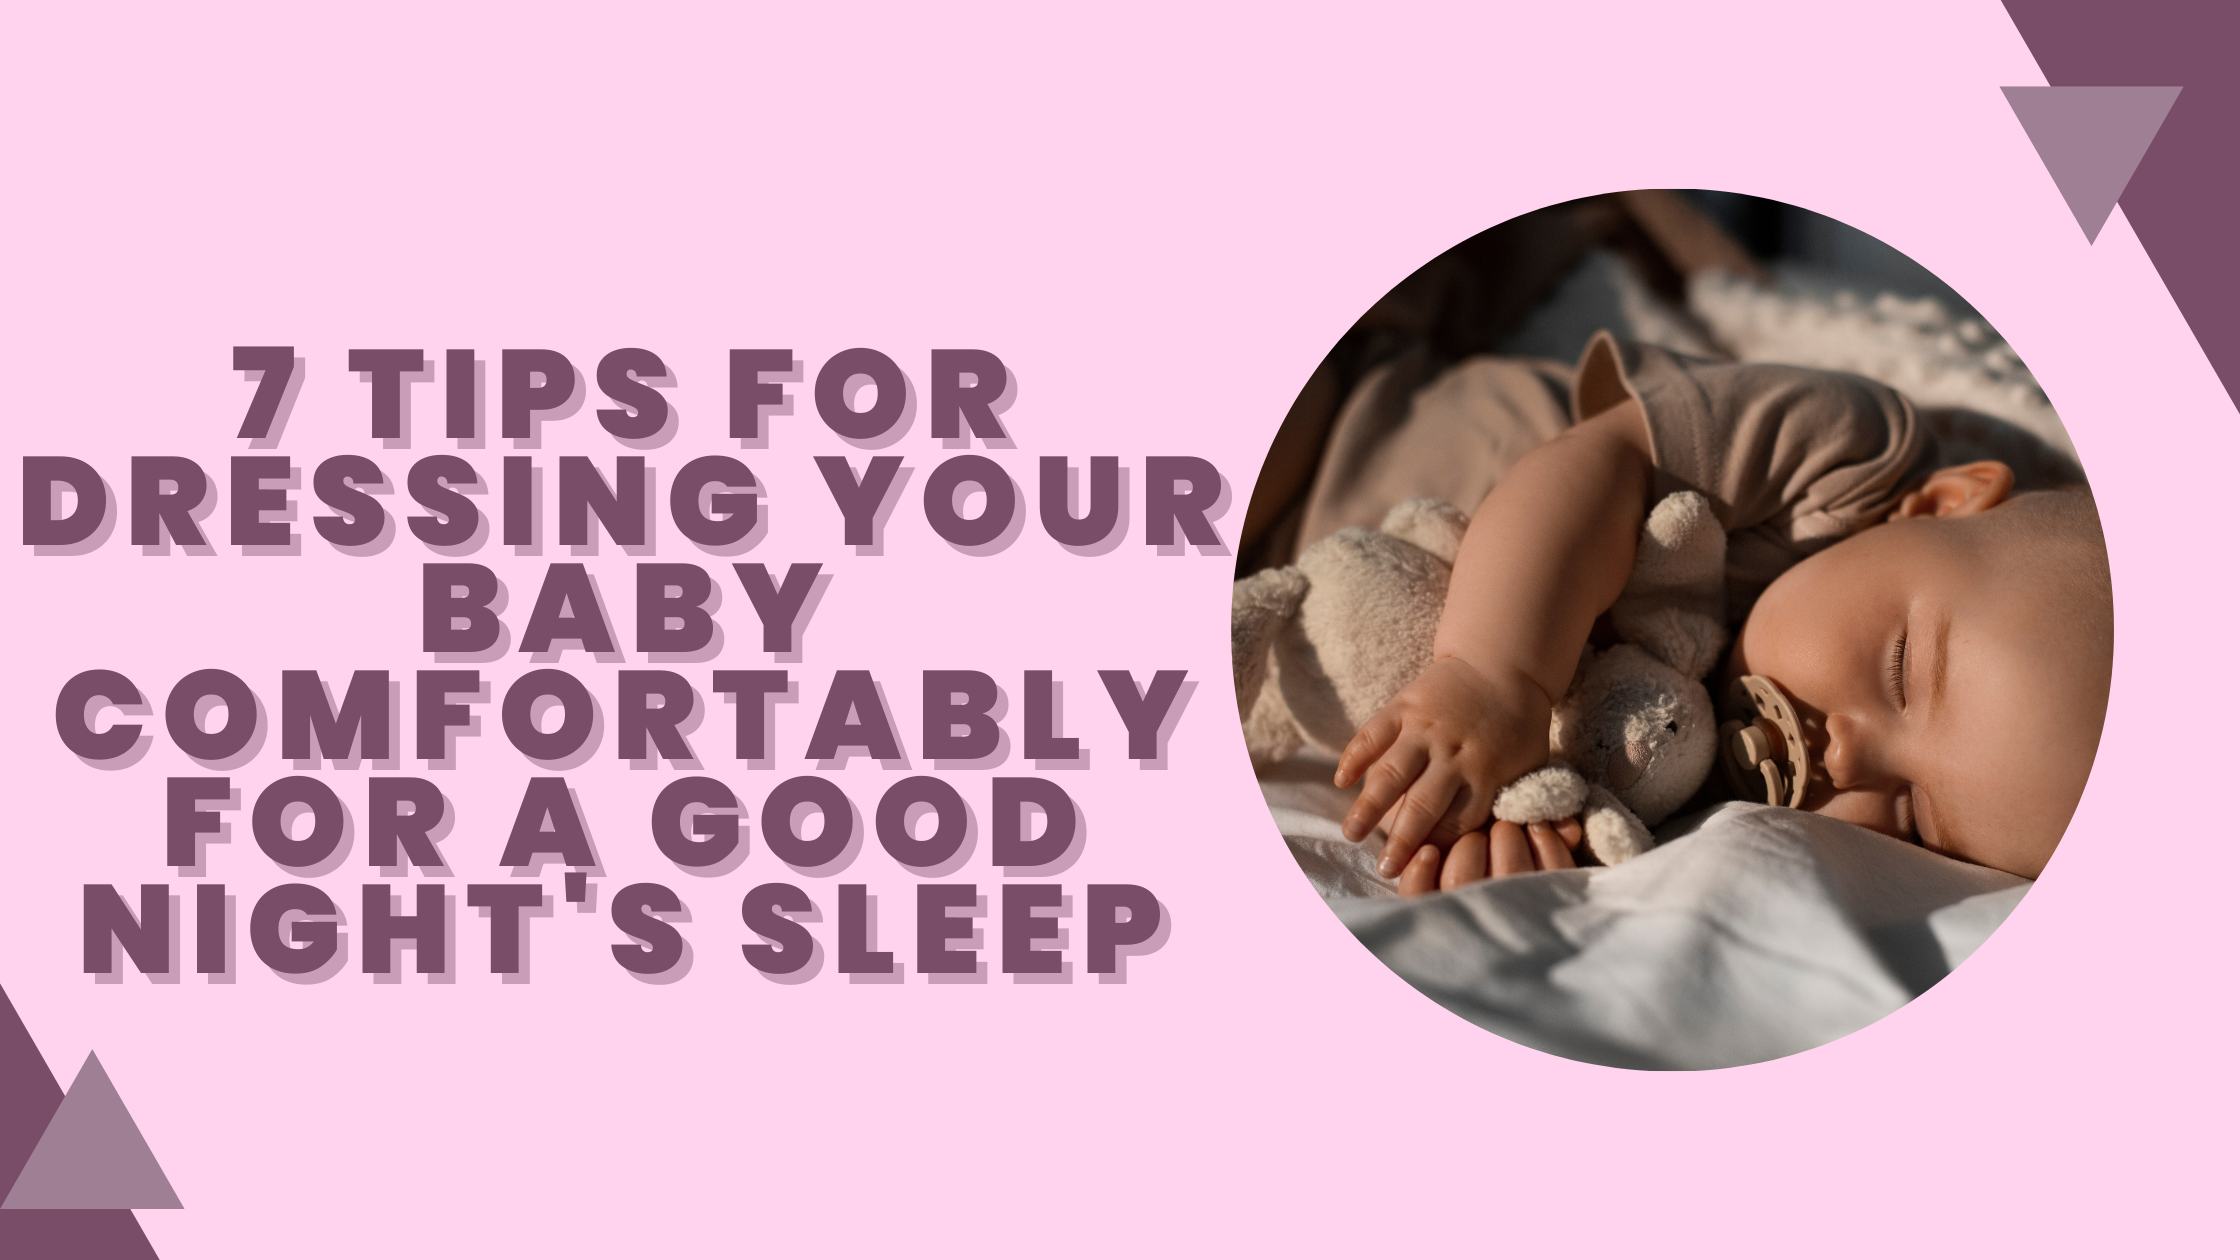 7 Tips for Dressing Your Baby Comfortably for a Good Night's Sleep